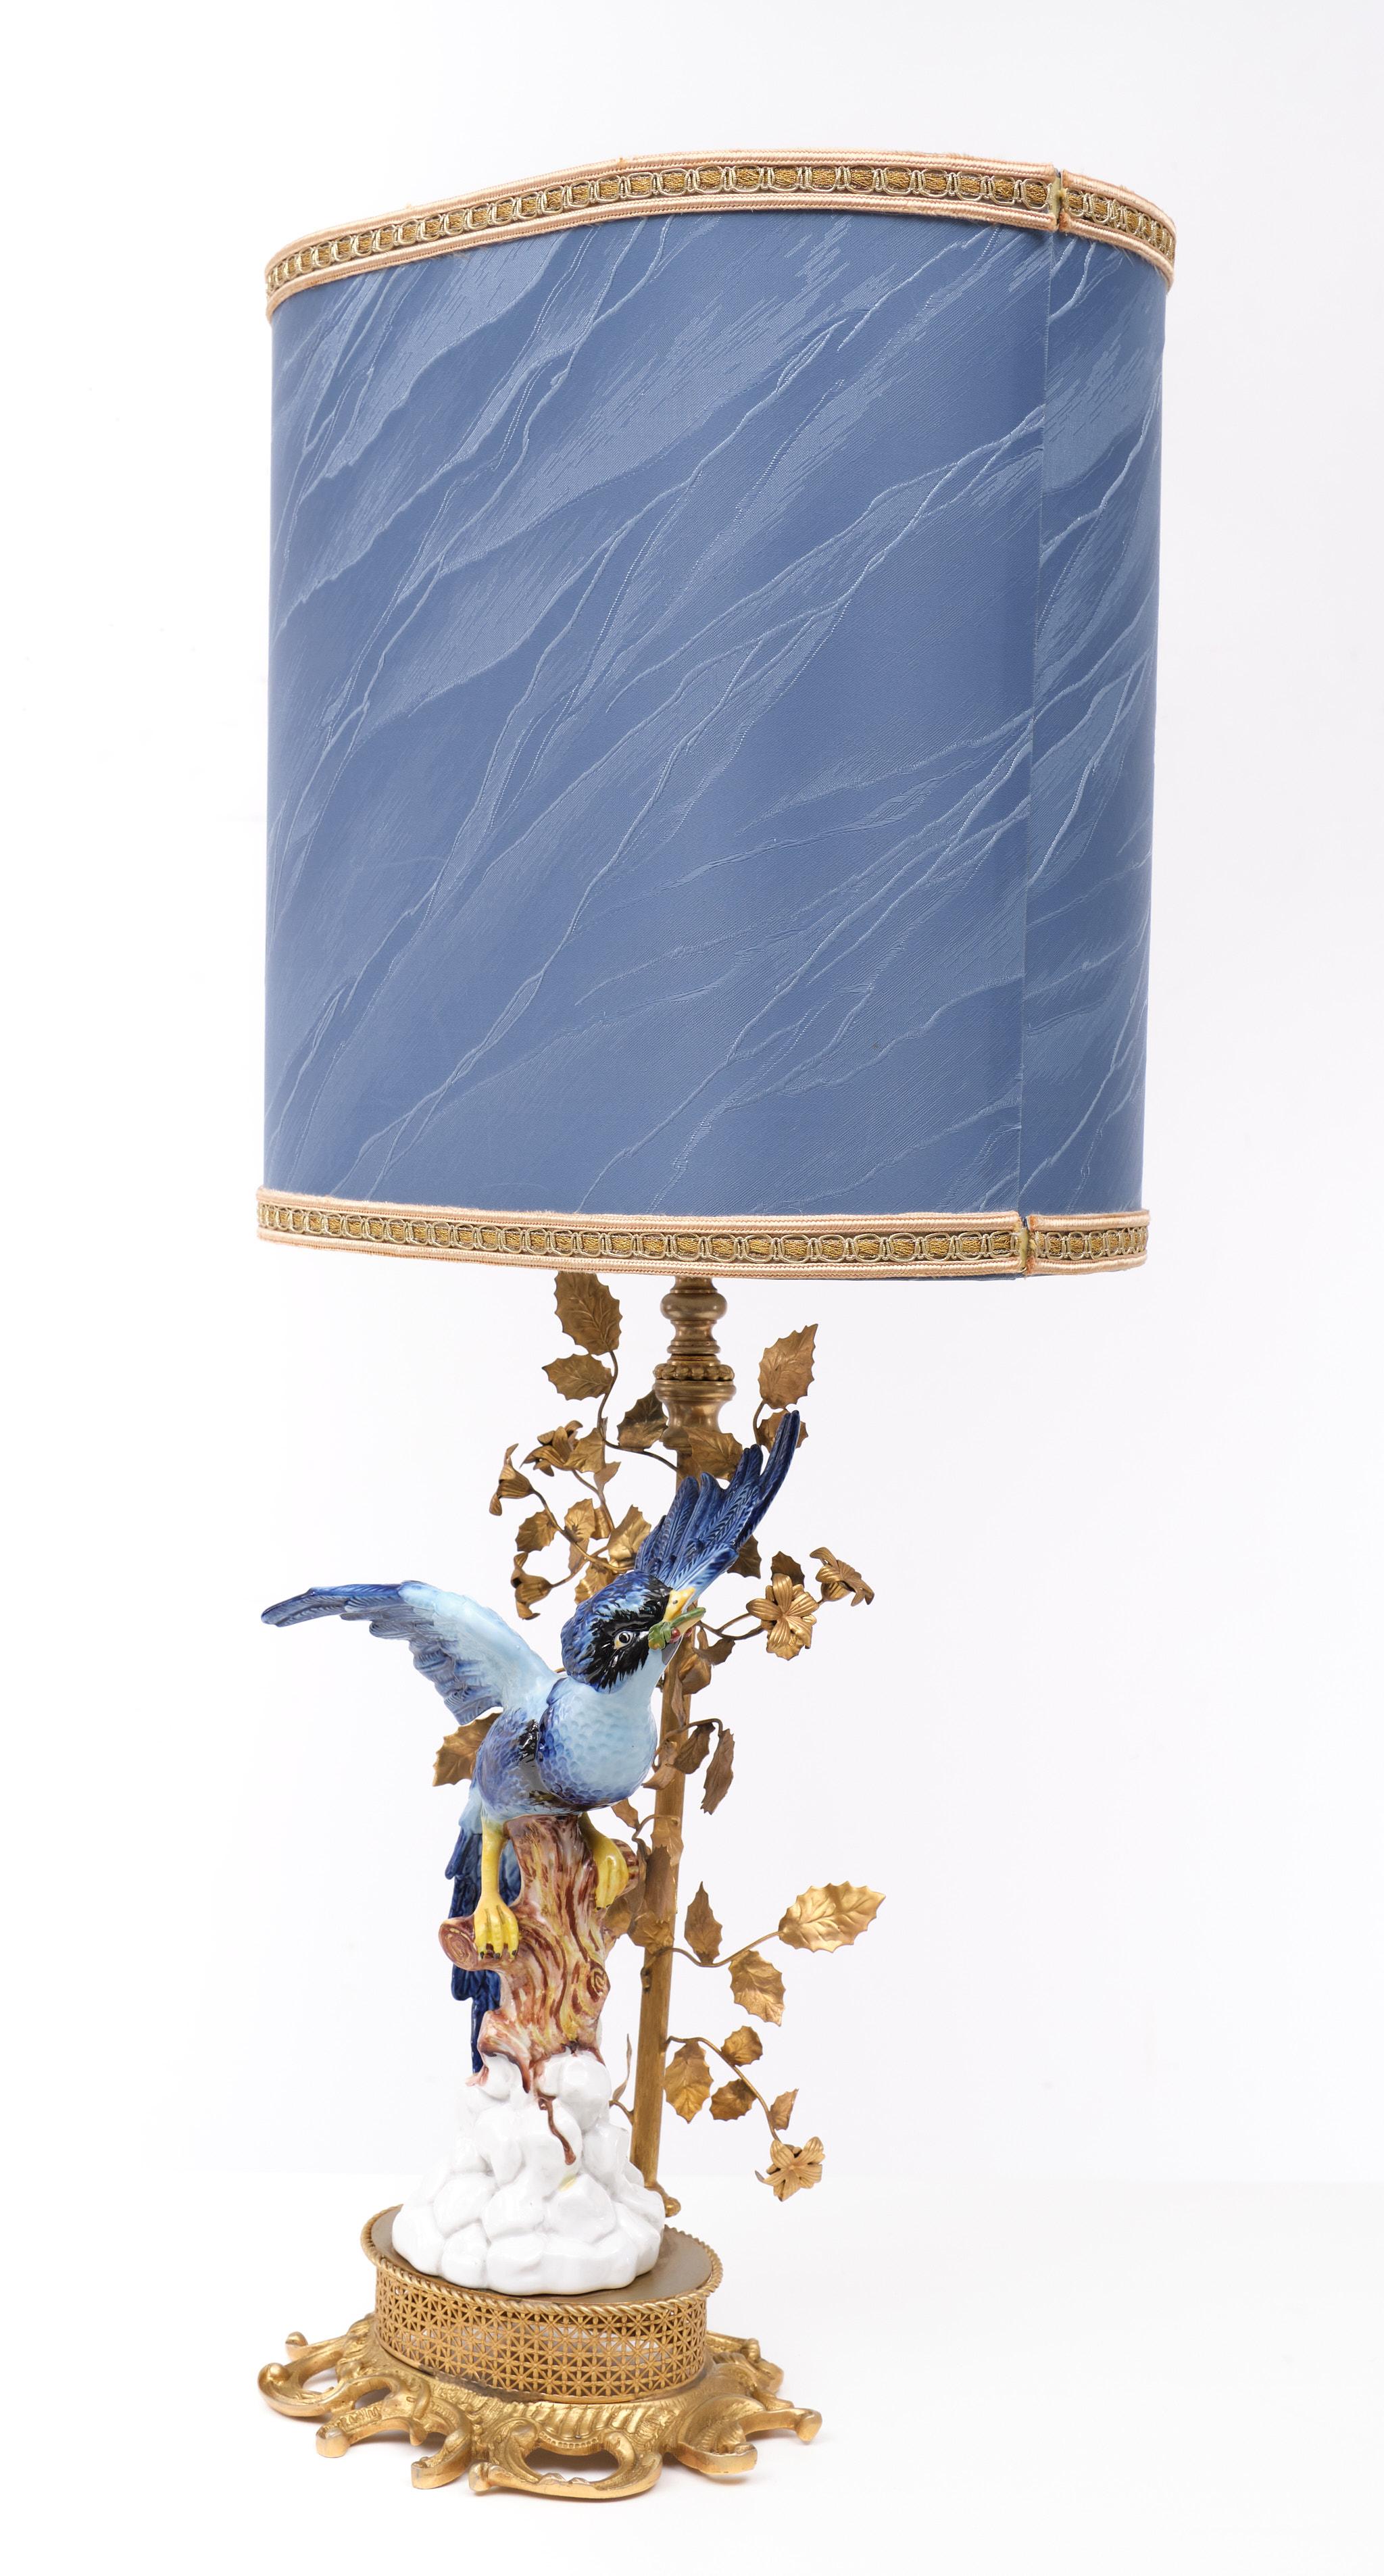 Stunning  Giulia Mangani, Italian Tole lamp with exotic Bird - Sèvres style porcelain - With movable flowers. Manufactured by Limoges . 1970s comes with its original Silk shade .
One large E27 bulb needed . 
Please don't hesitate to reach out for